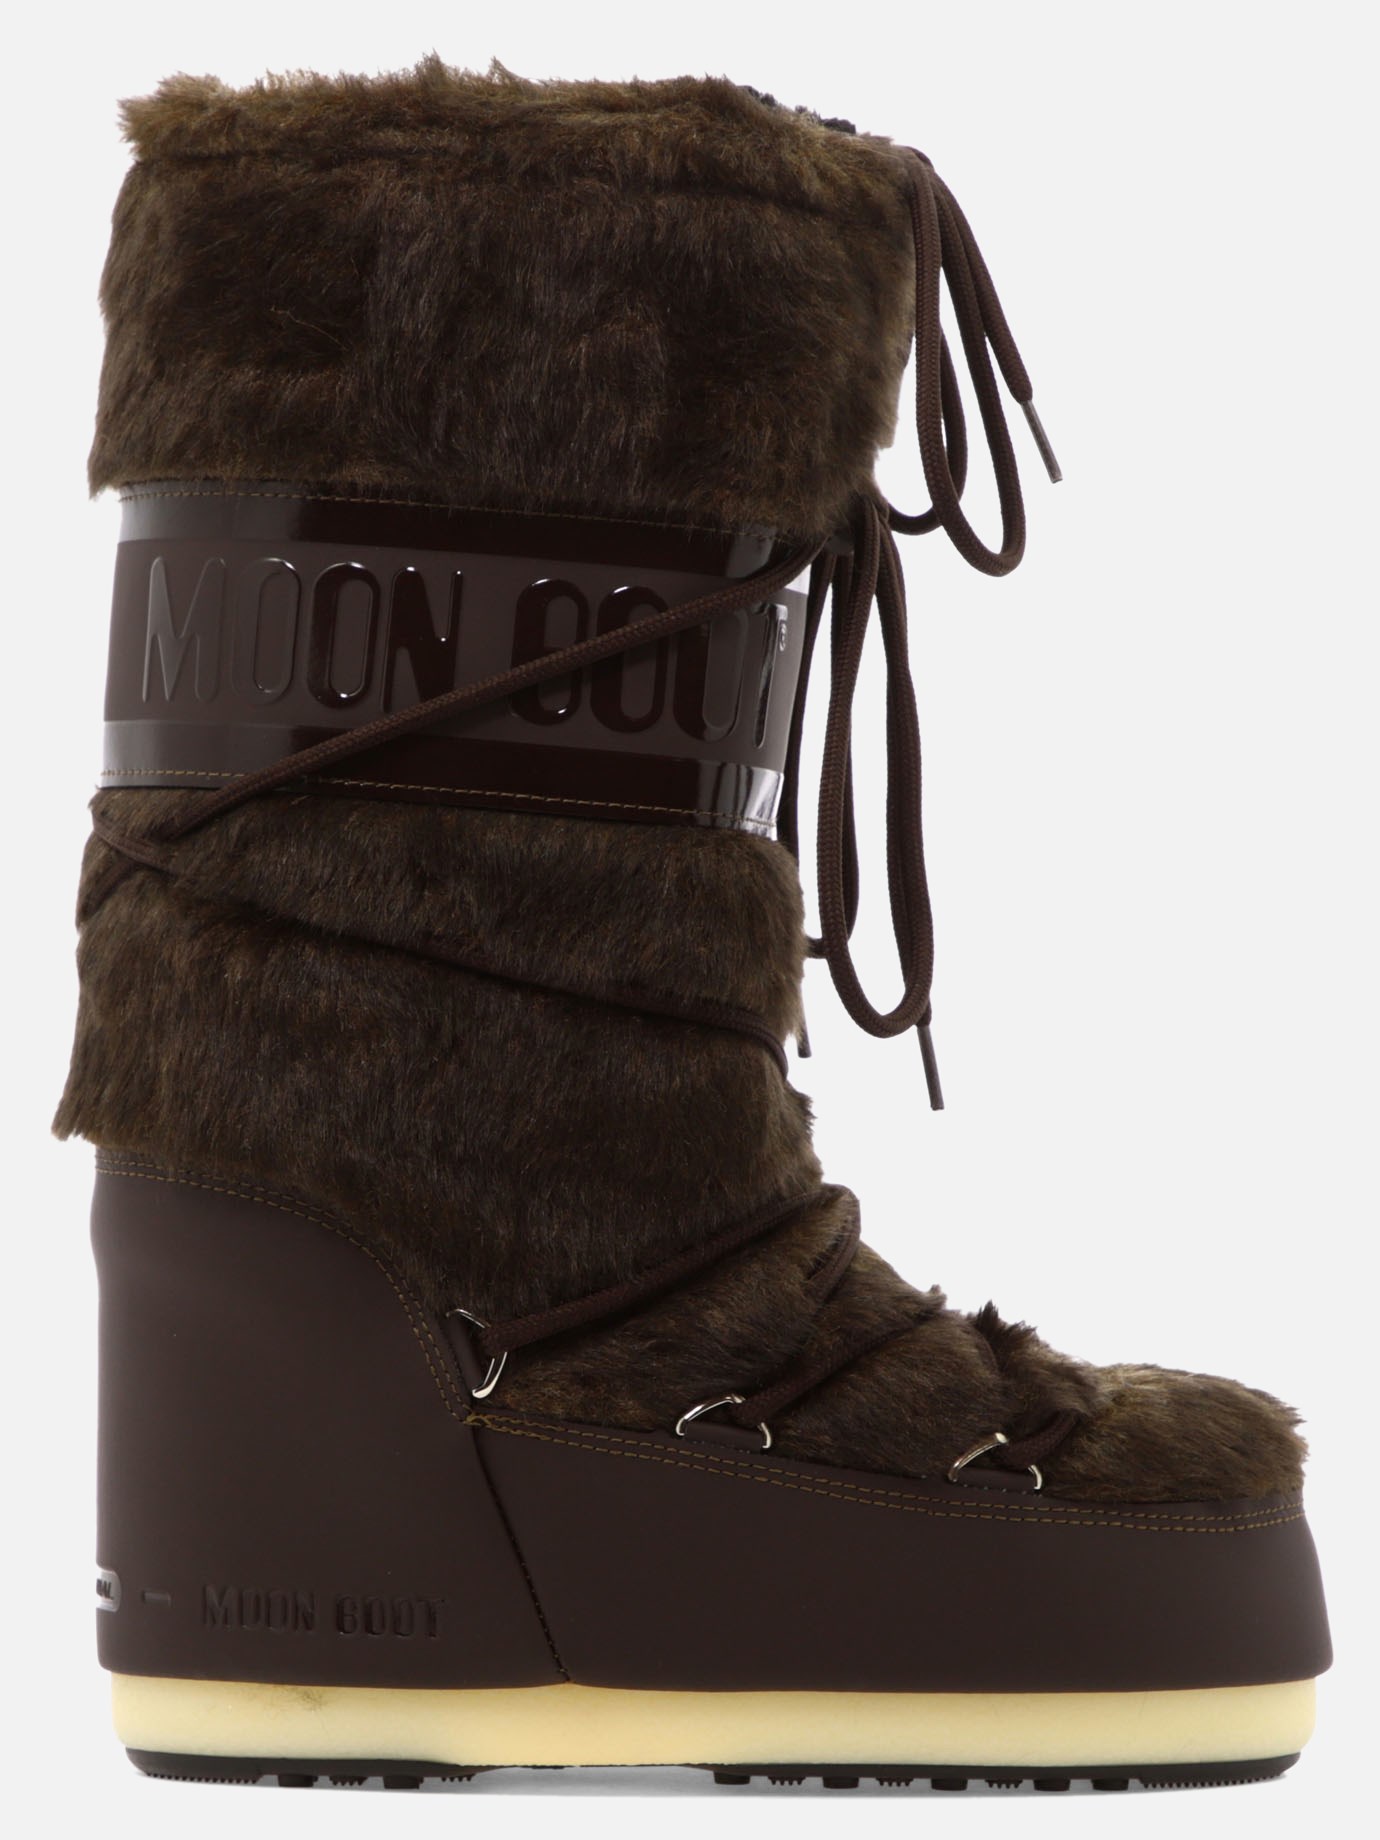  Icon  after-ski bootsby Moon Boot - 4